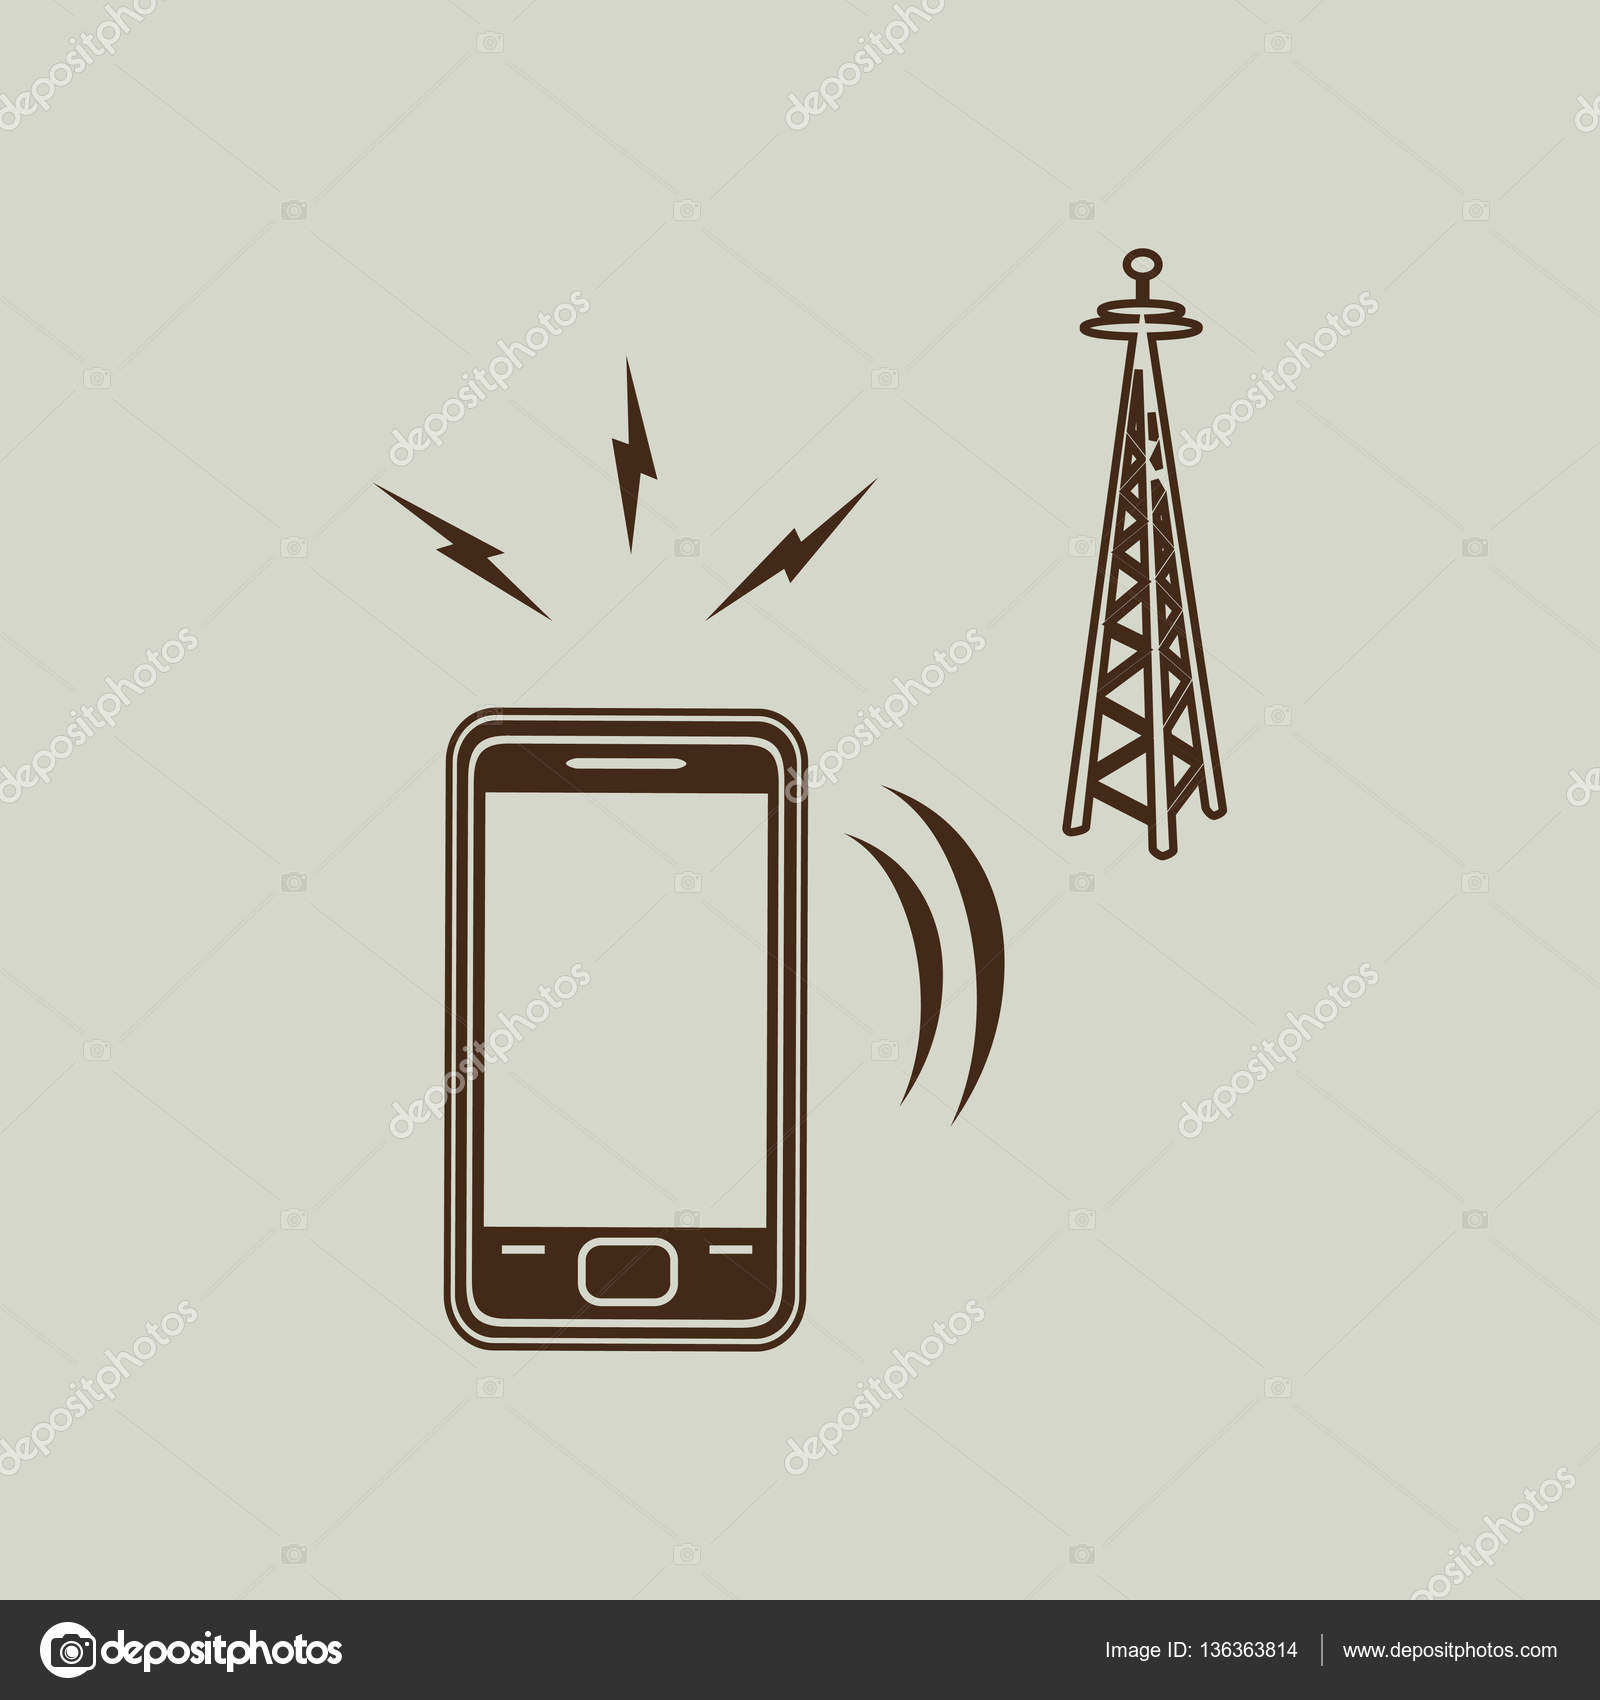 Mobile tower. Illustration of mobile tower in colour background. | CanStock